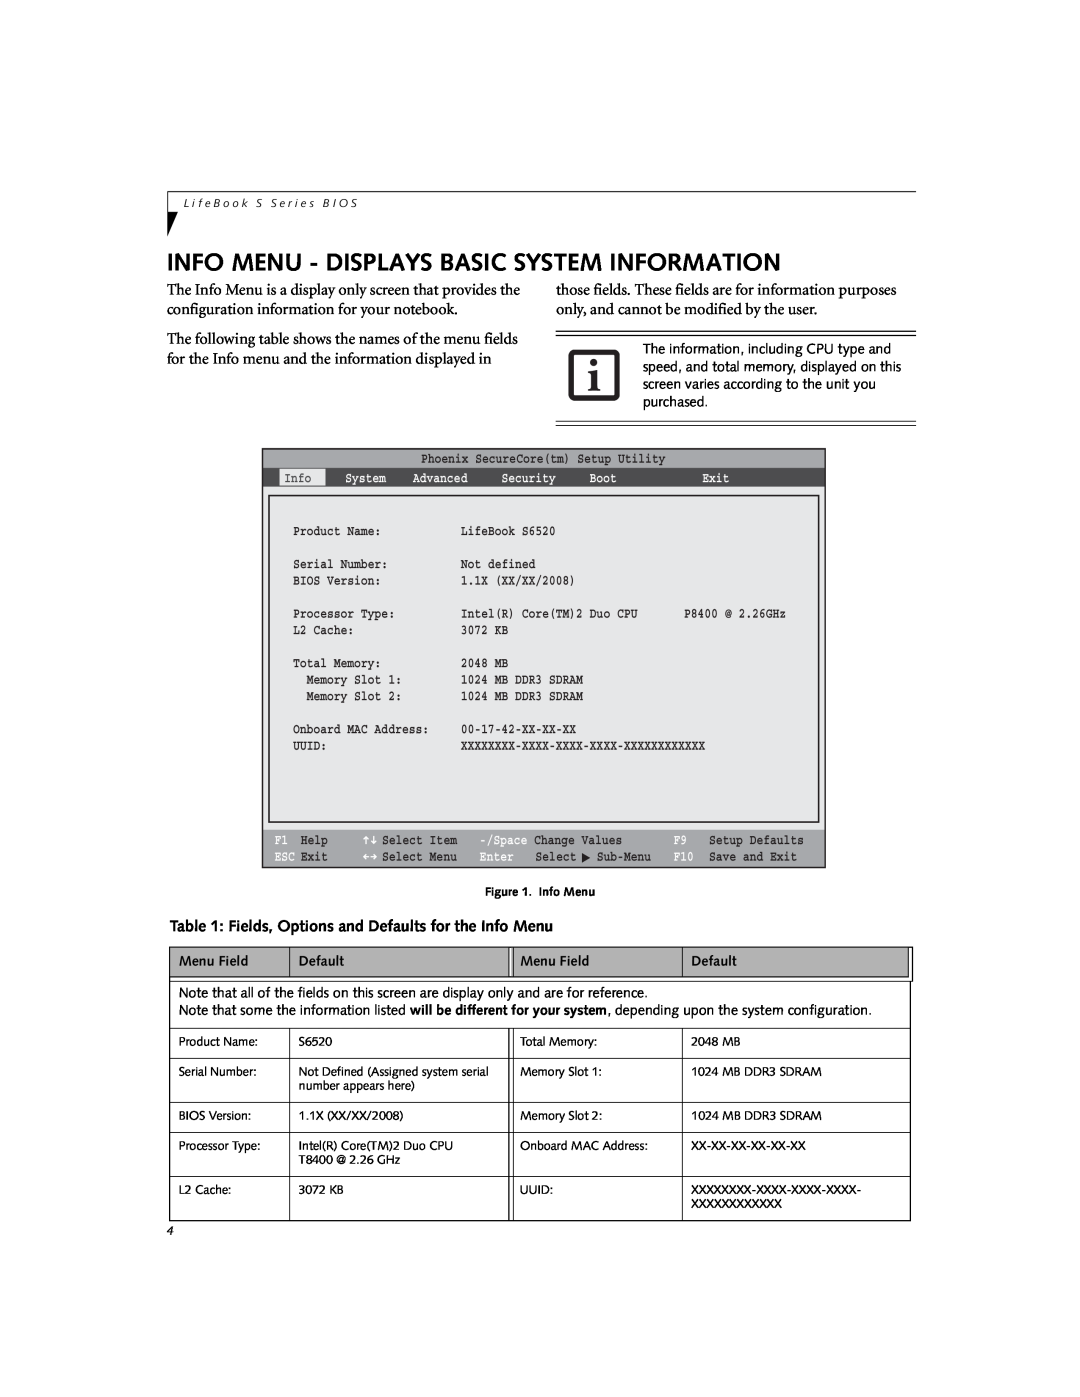 Fujitsu S6520 manual Info Menu - Displays Basic System Information, Fields, Options and Defaults for the Info Menu 